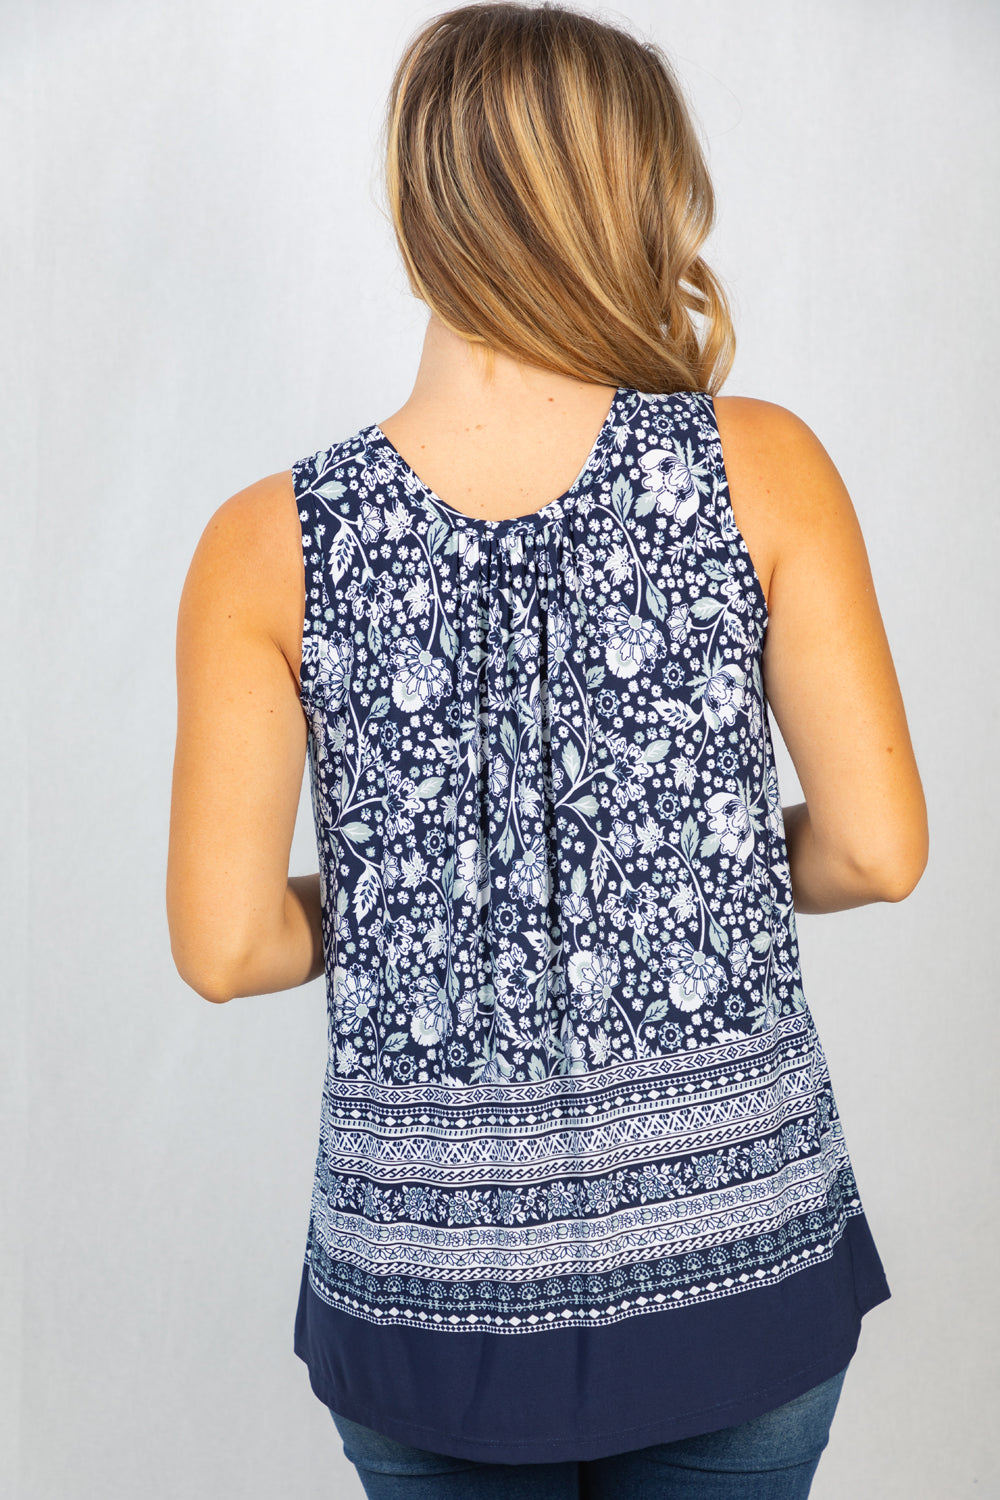 The Cassie Floral Tank